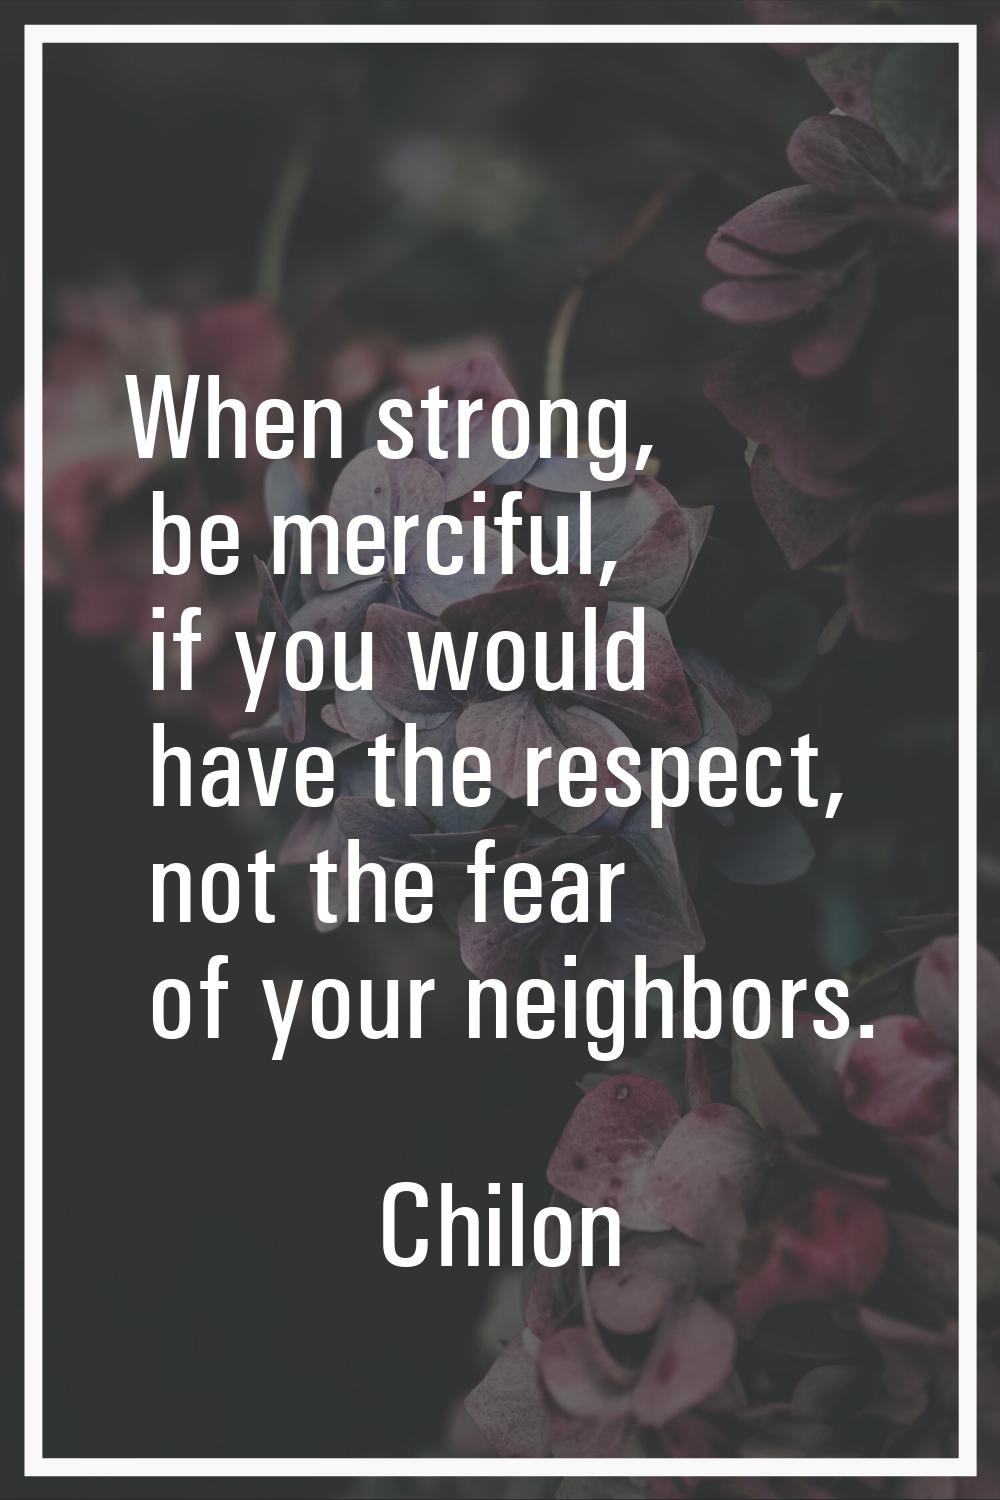 When strong, be merciful, if you would have the respect, not the fear of your neighbors.